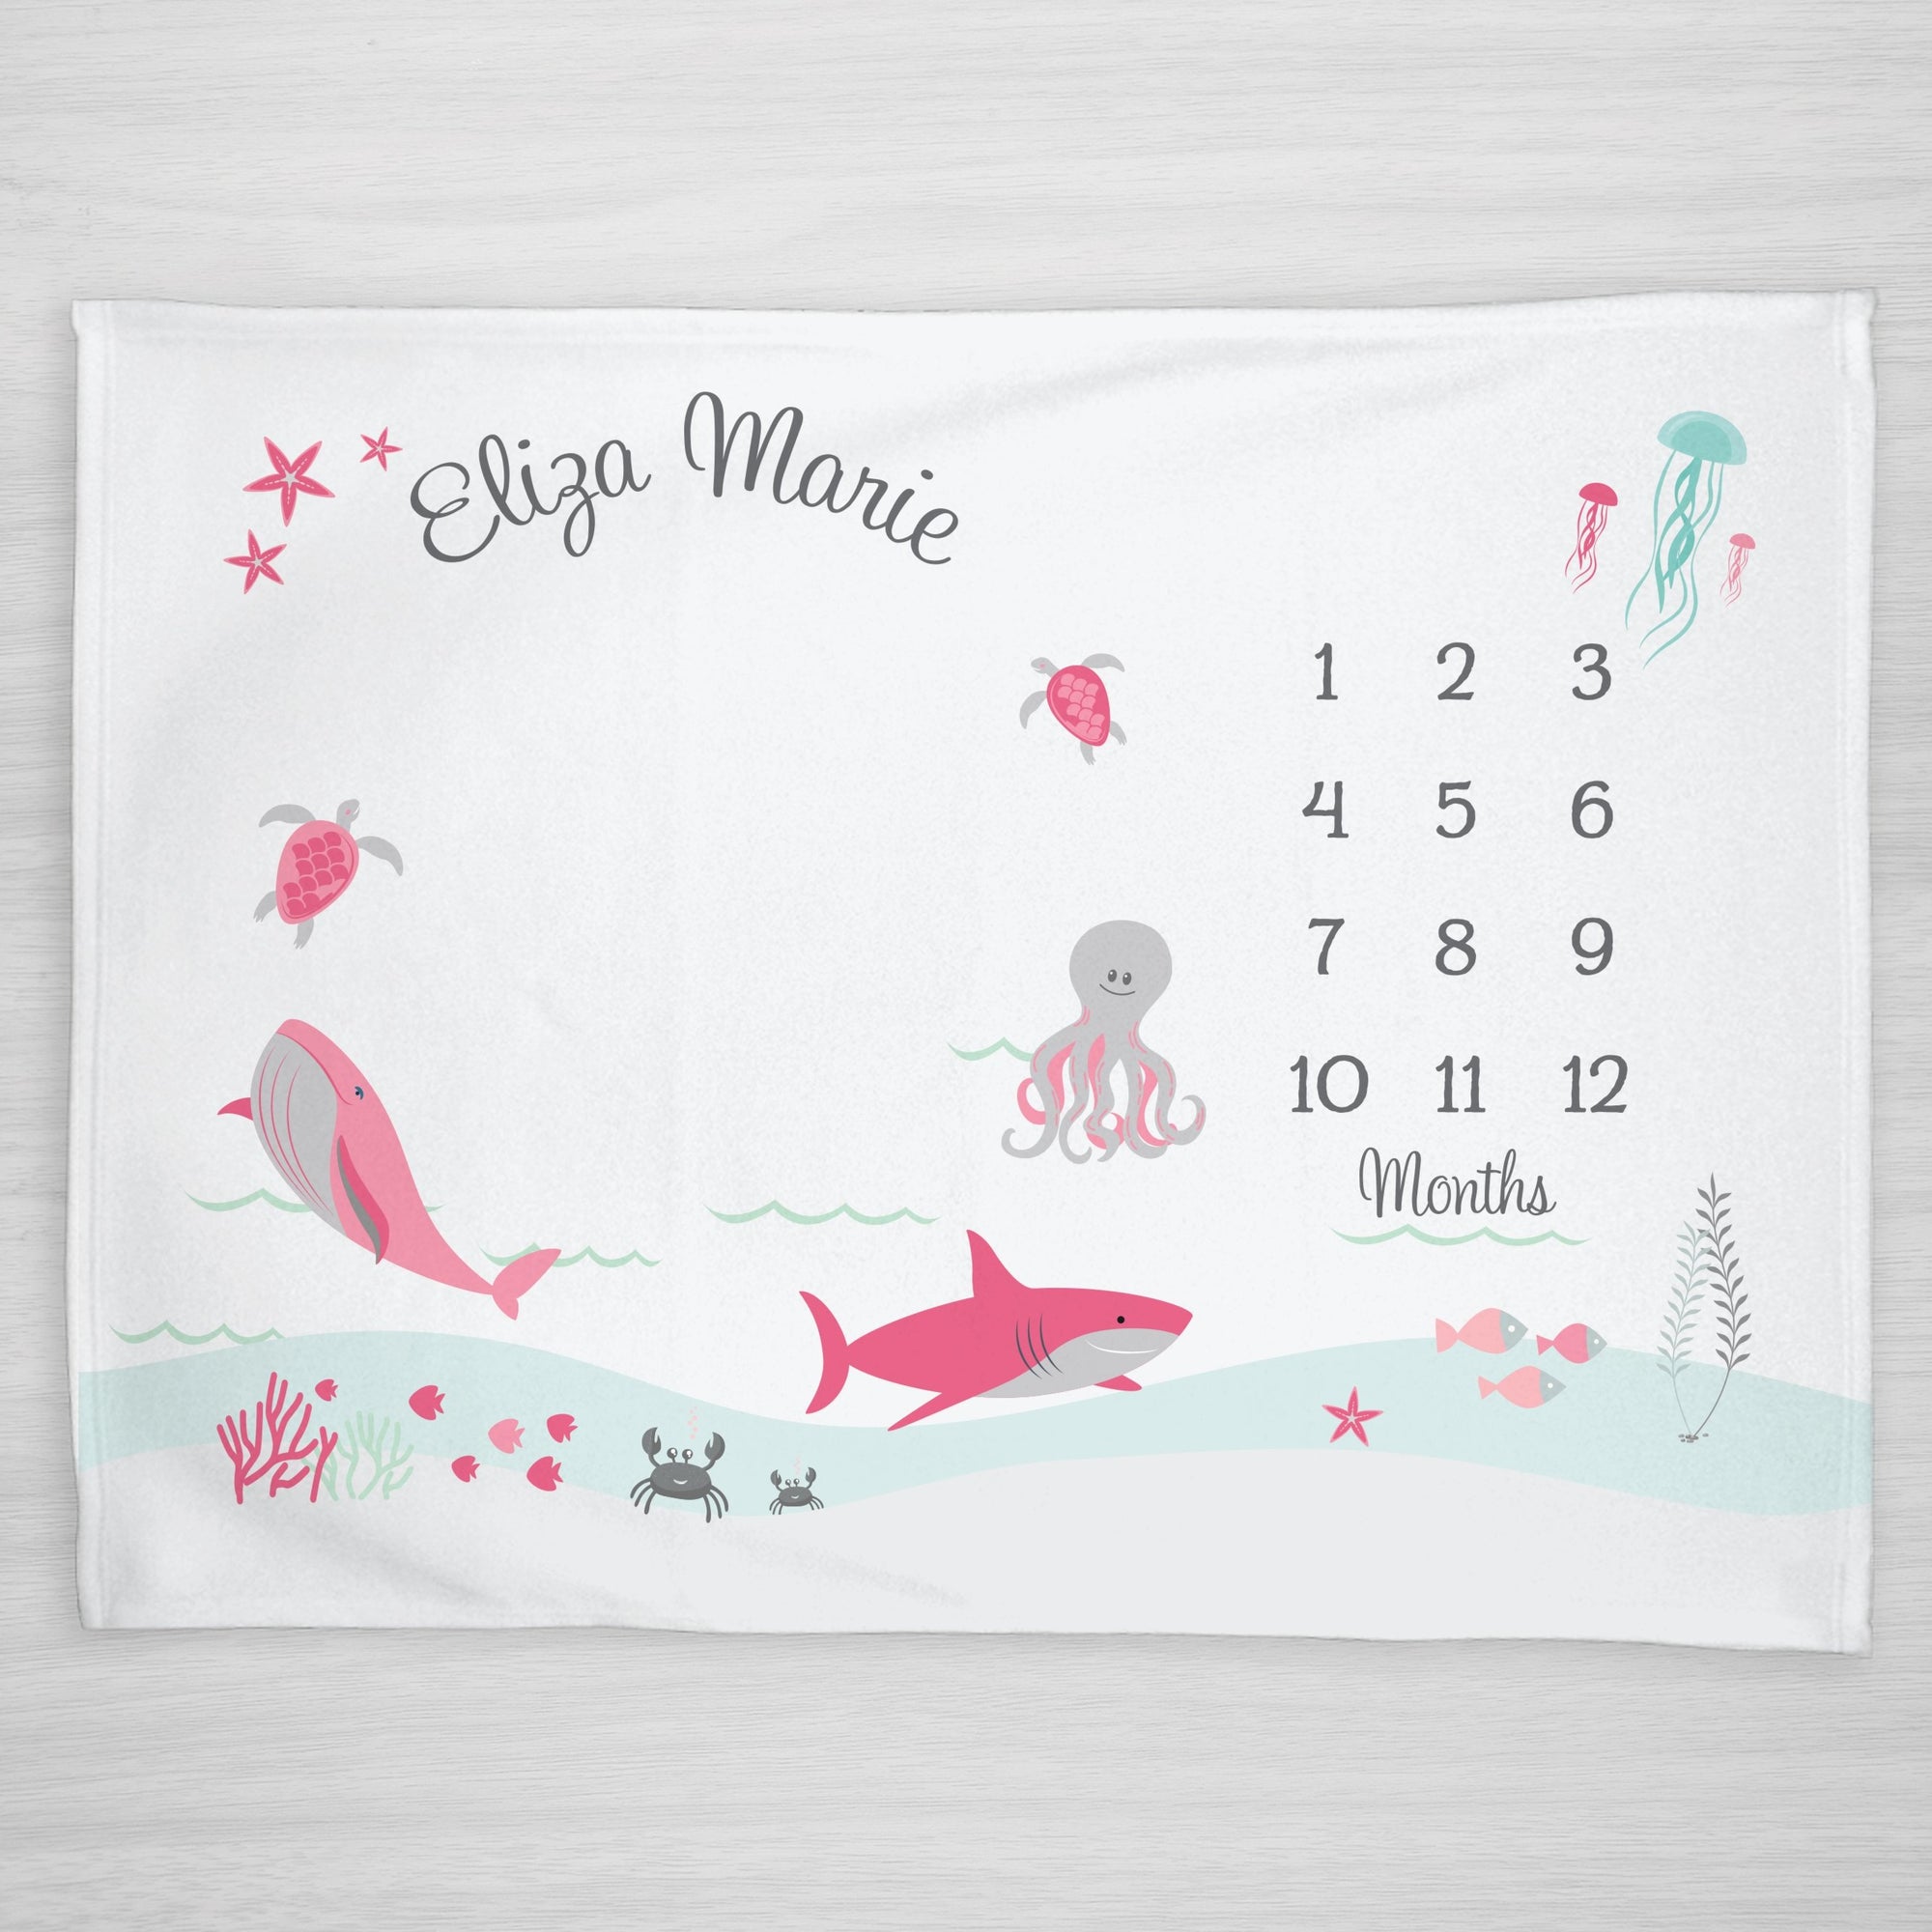 Under the Sea Milestone Blanket, Personalized in pinks, gray, and seafoam green. Featuring an octopus, whale, sea turtle, shark, and more